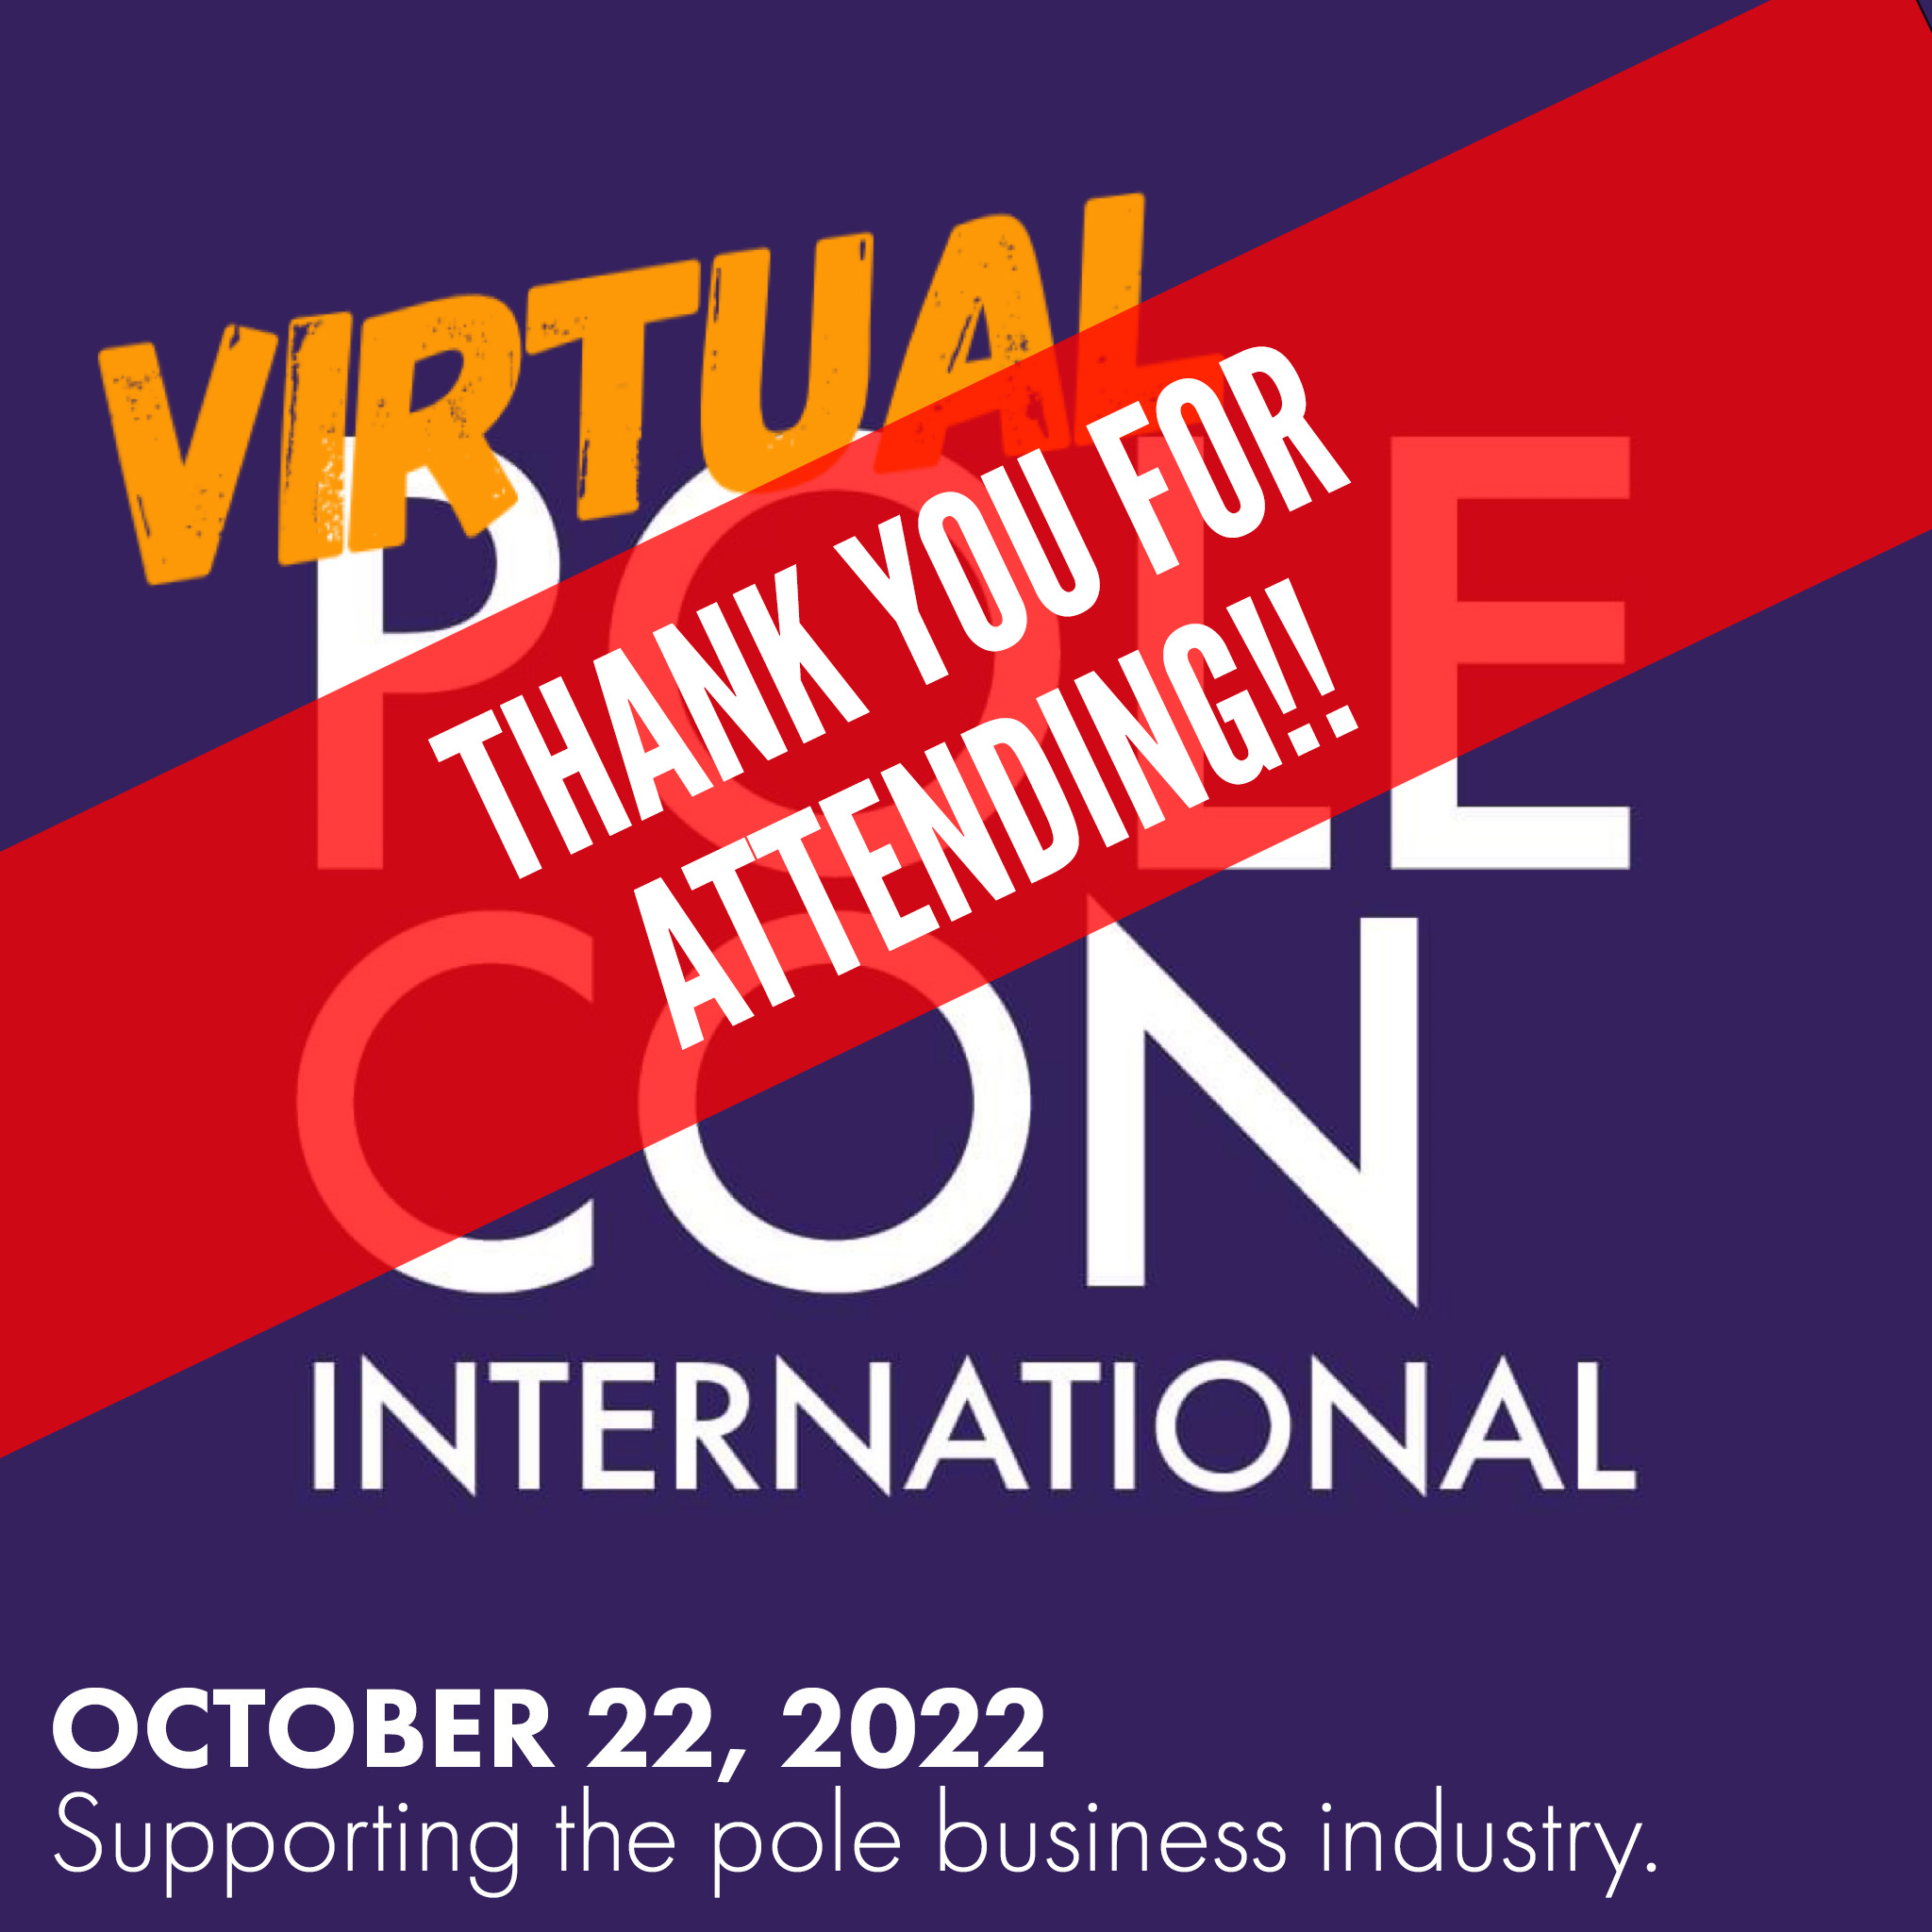 Virtual PoleCon October 2022 with banner: thank you for attending!